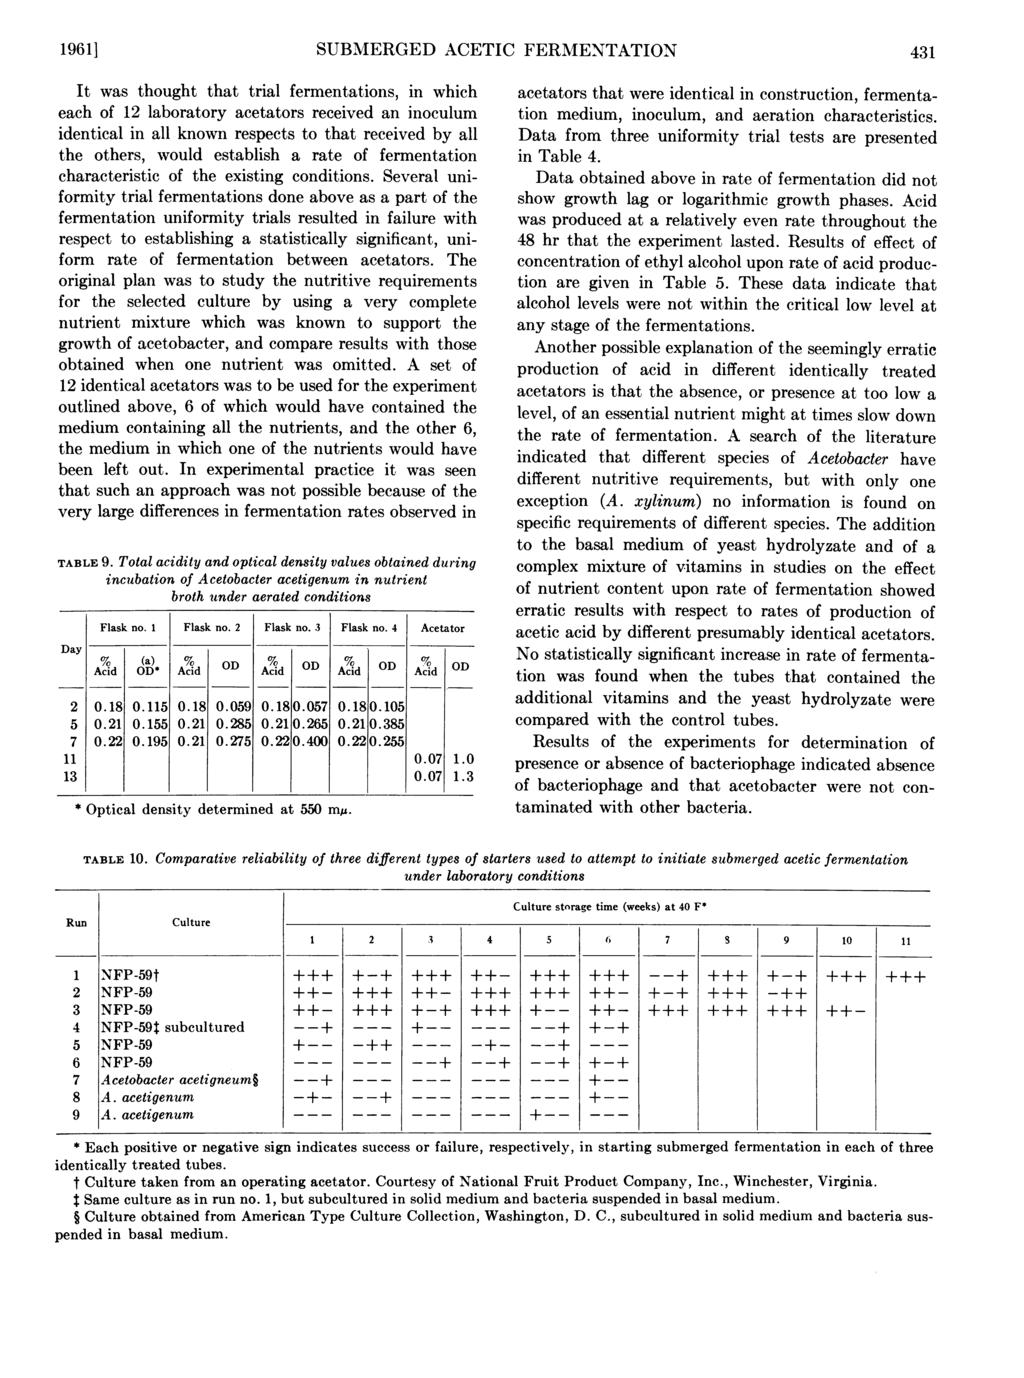 19611 SUBMERGED ACETIC FERMENTATION 431 It was thought that trial fermentations, in which each of 12 laboratory acetators received an inoculum identical in all known respects to that received by all